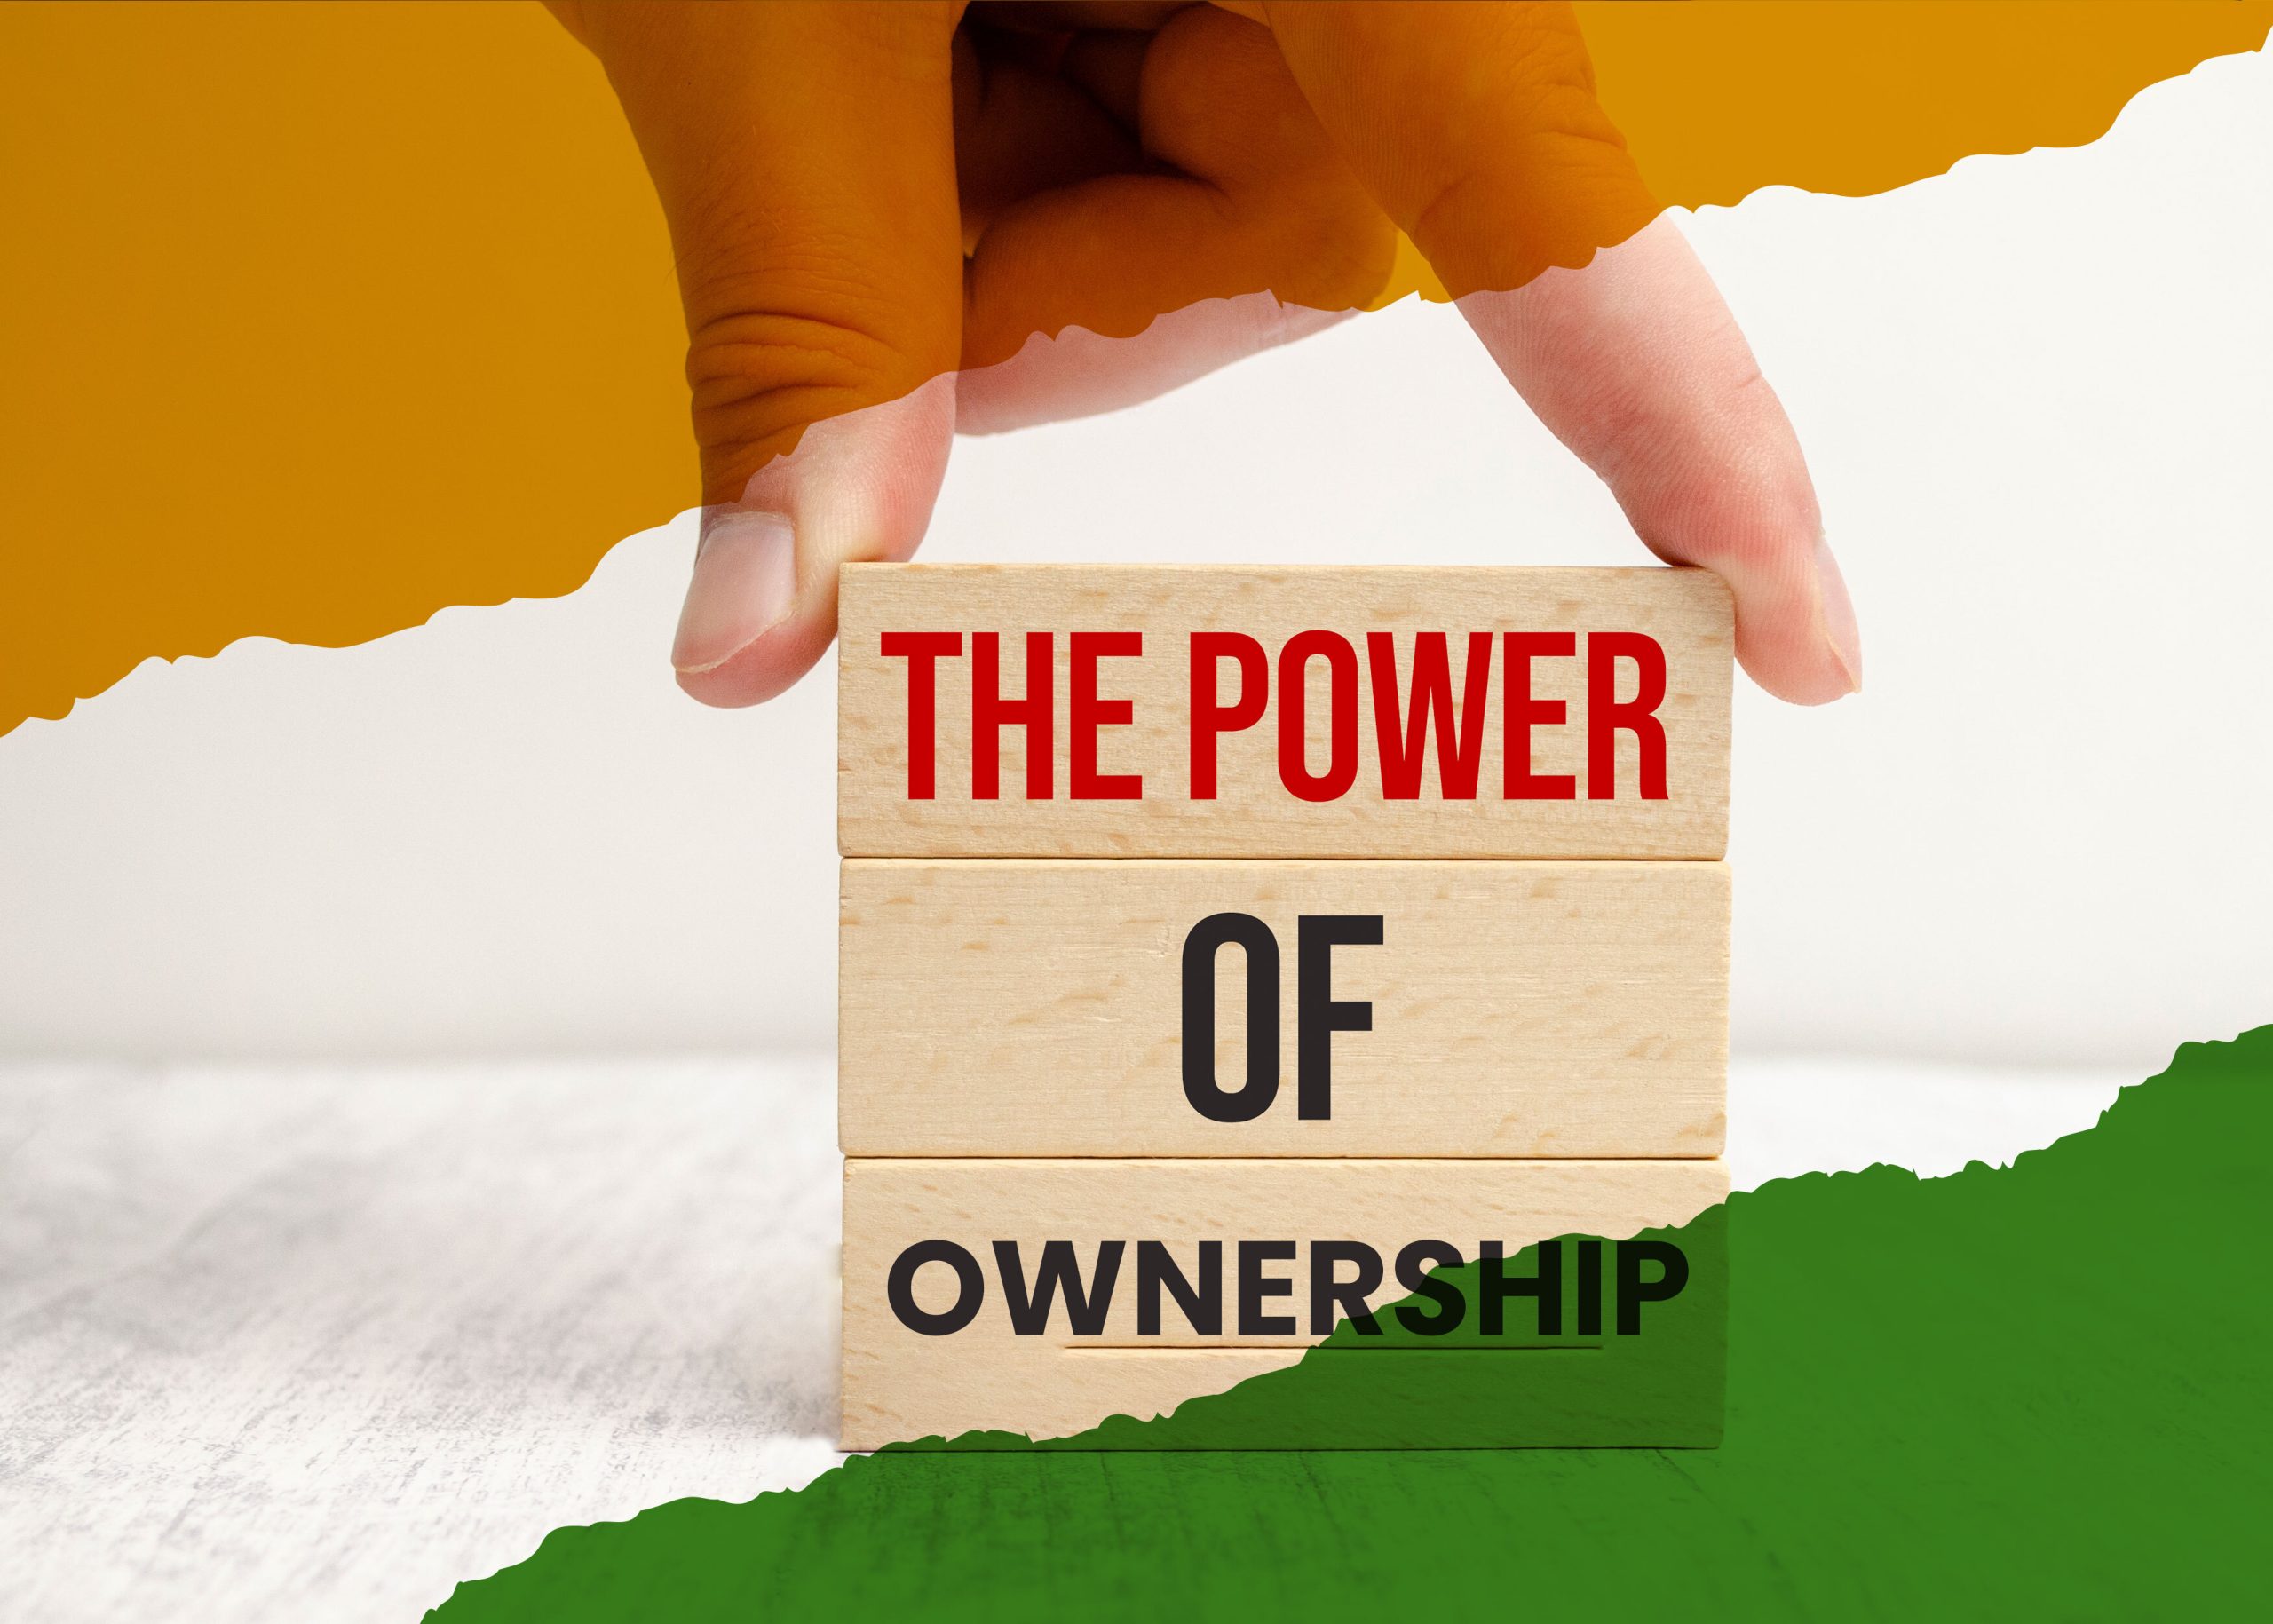 The power of ownership